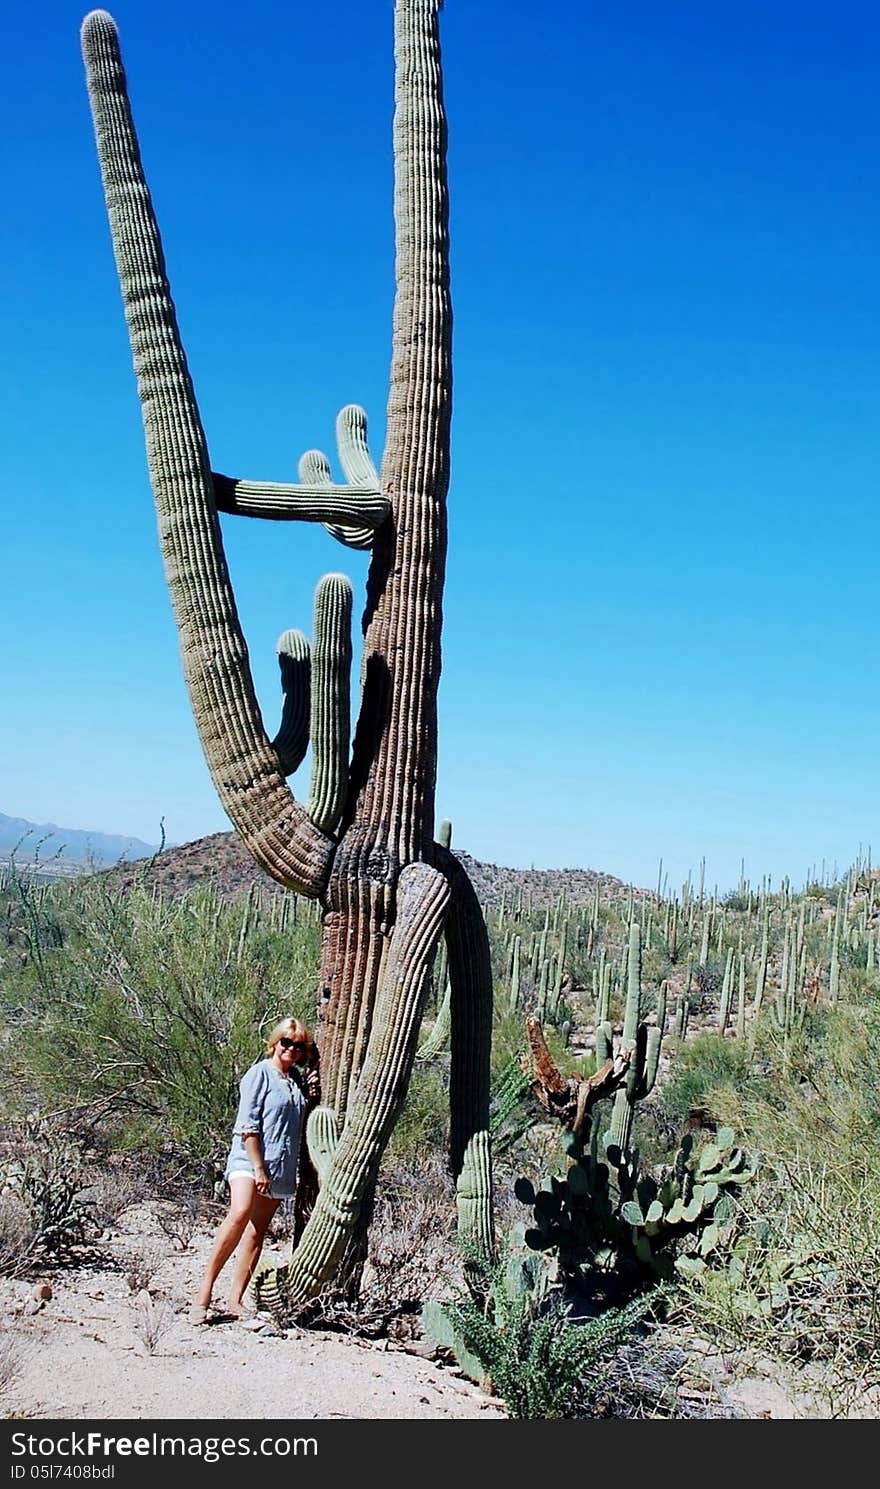 The form of this huge giant cacti as rider or knight ,height of woman nearby is 168 cm and size of cacti really amazing and unbelievable. The form of this huge giant cacti as rider or knight ,height of woman nearby is 168 cm and size of cacti really amazing and unbelievable